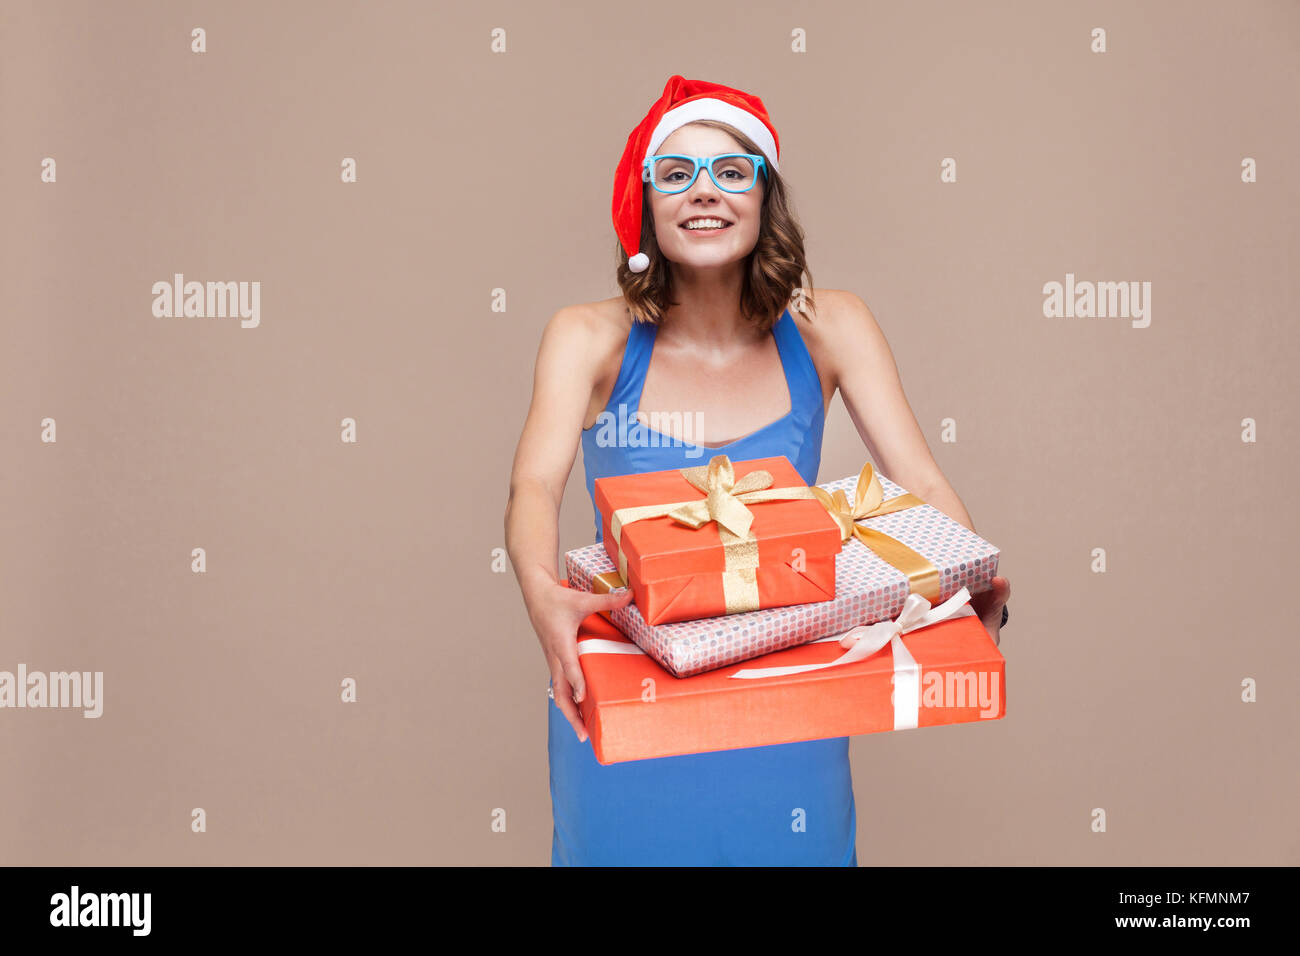 Its for you. Delivery woman holding a red box. Studio shot on brown background Stock Photo